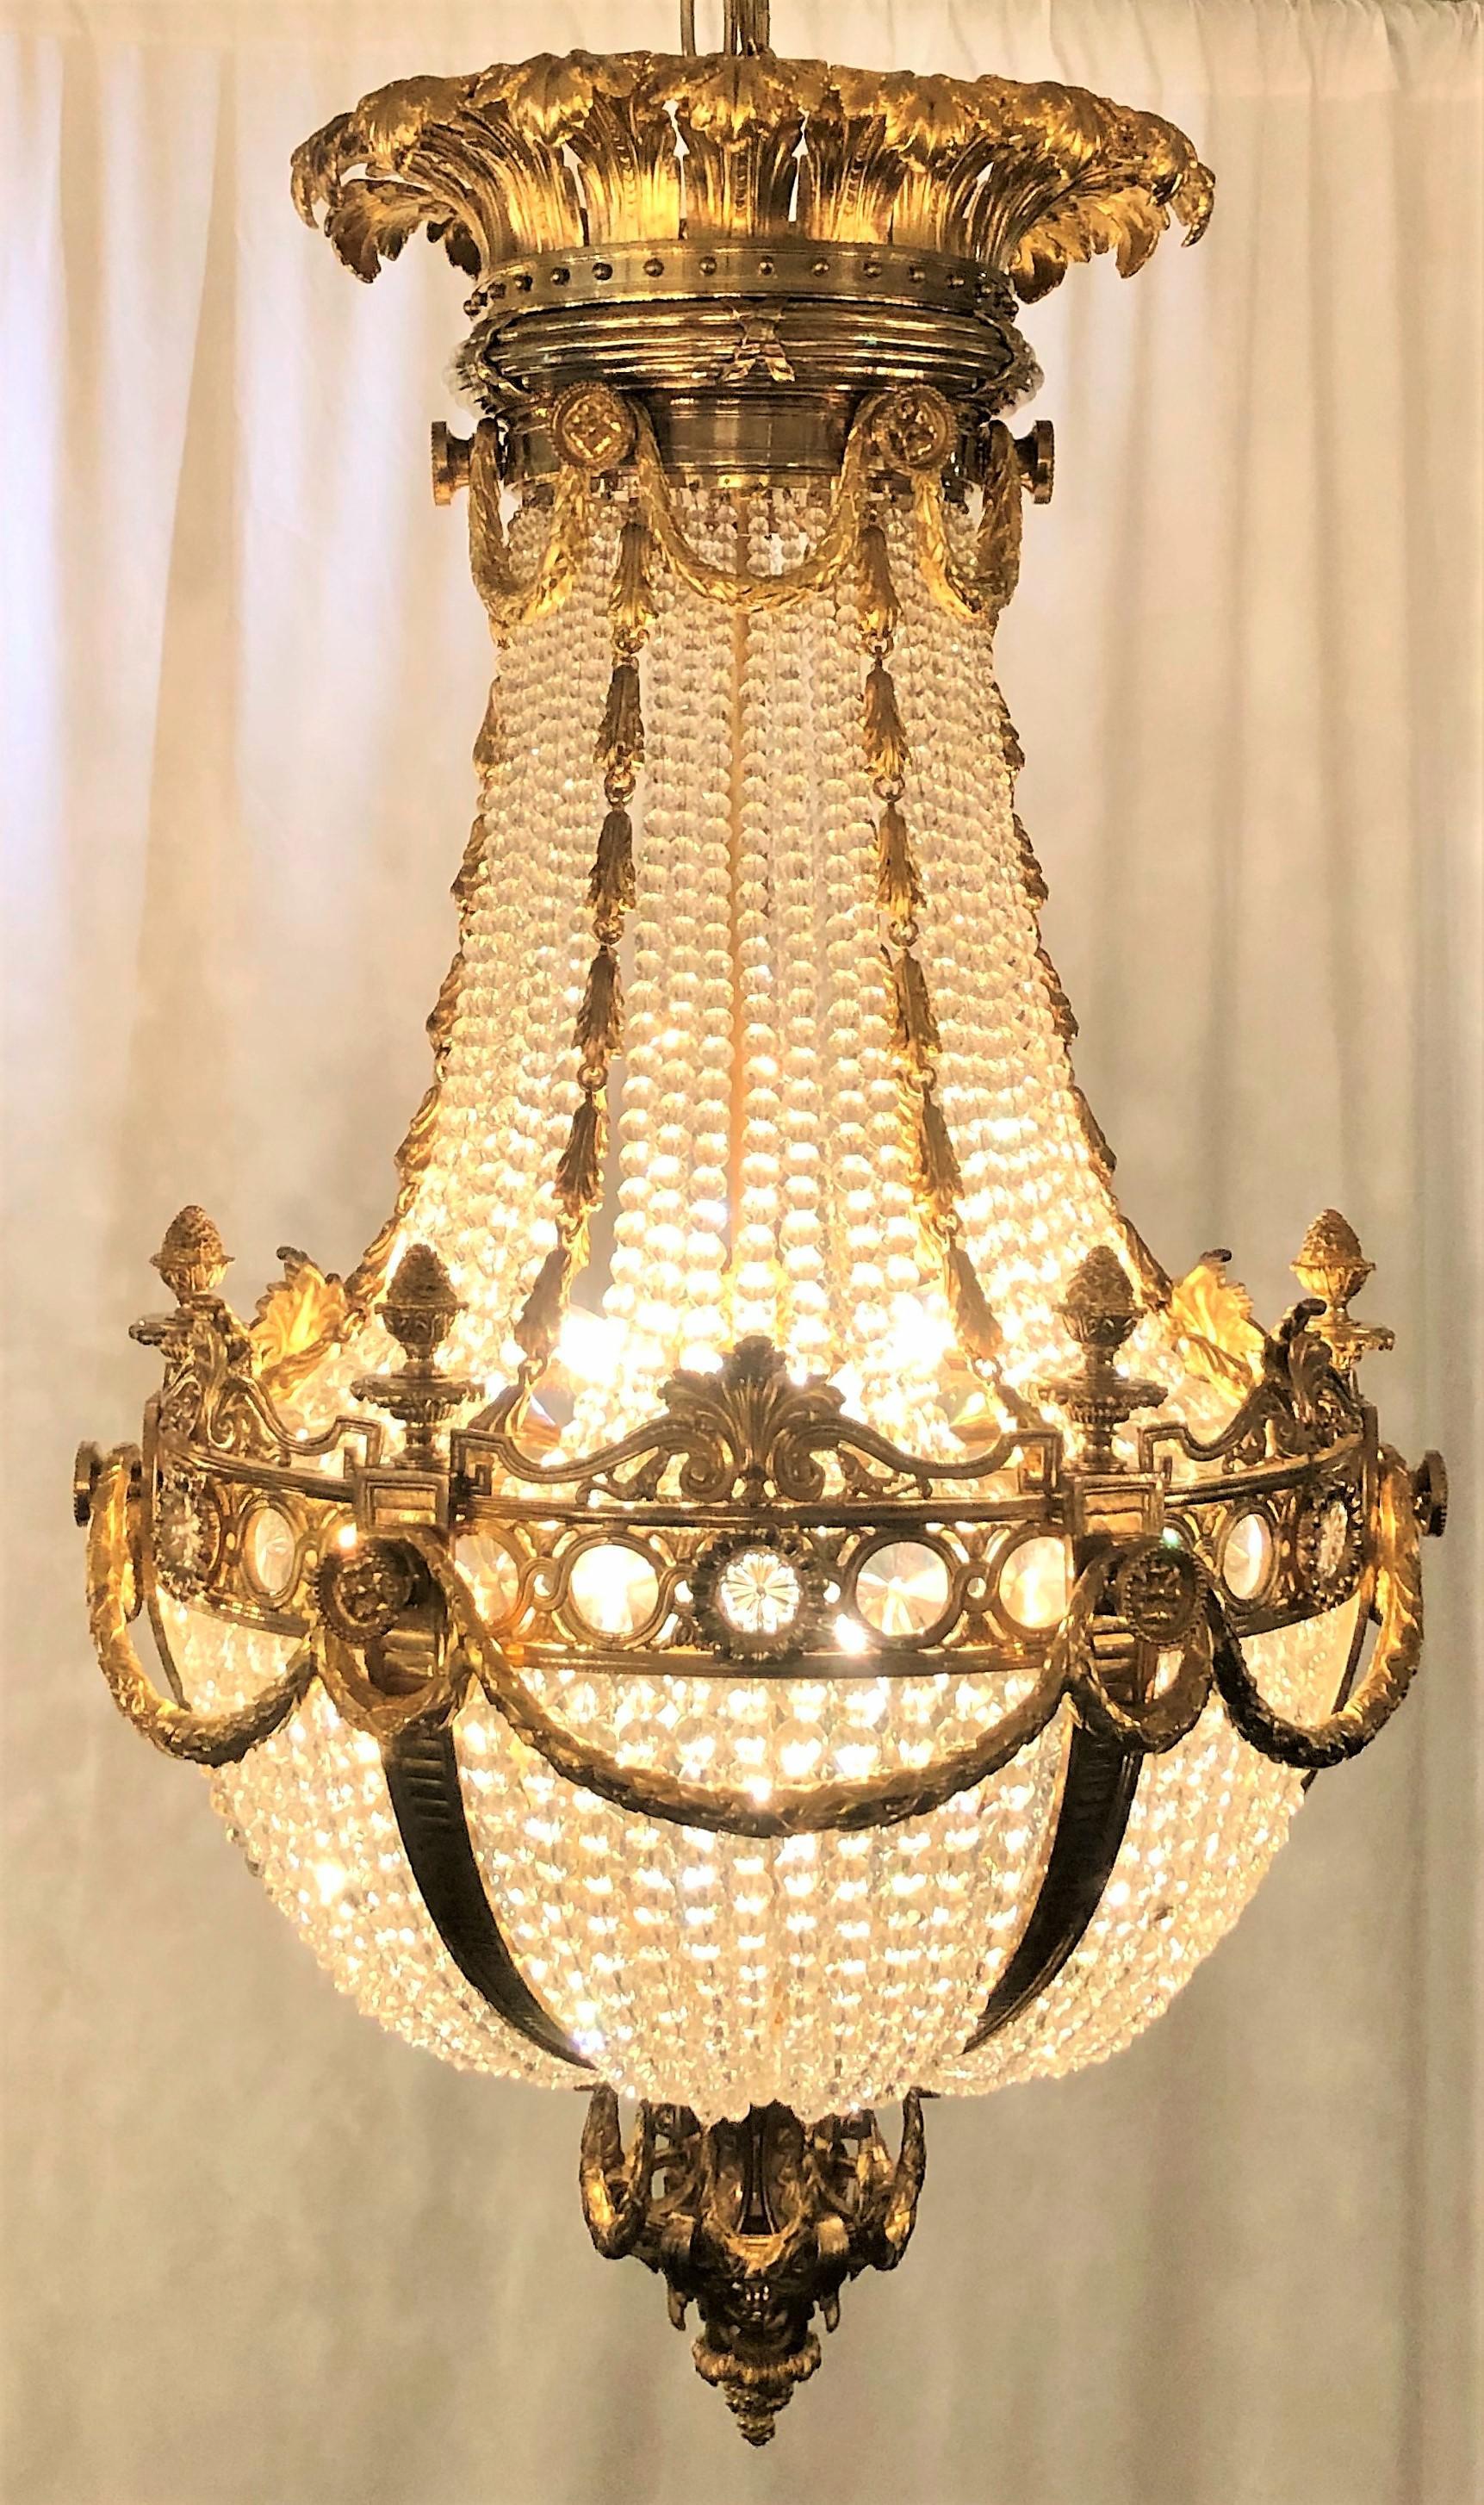 Antique French bronze dore and baccarat crystal neoclassic chandelier.